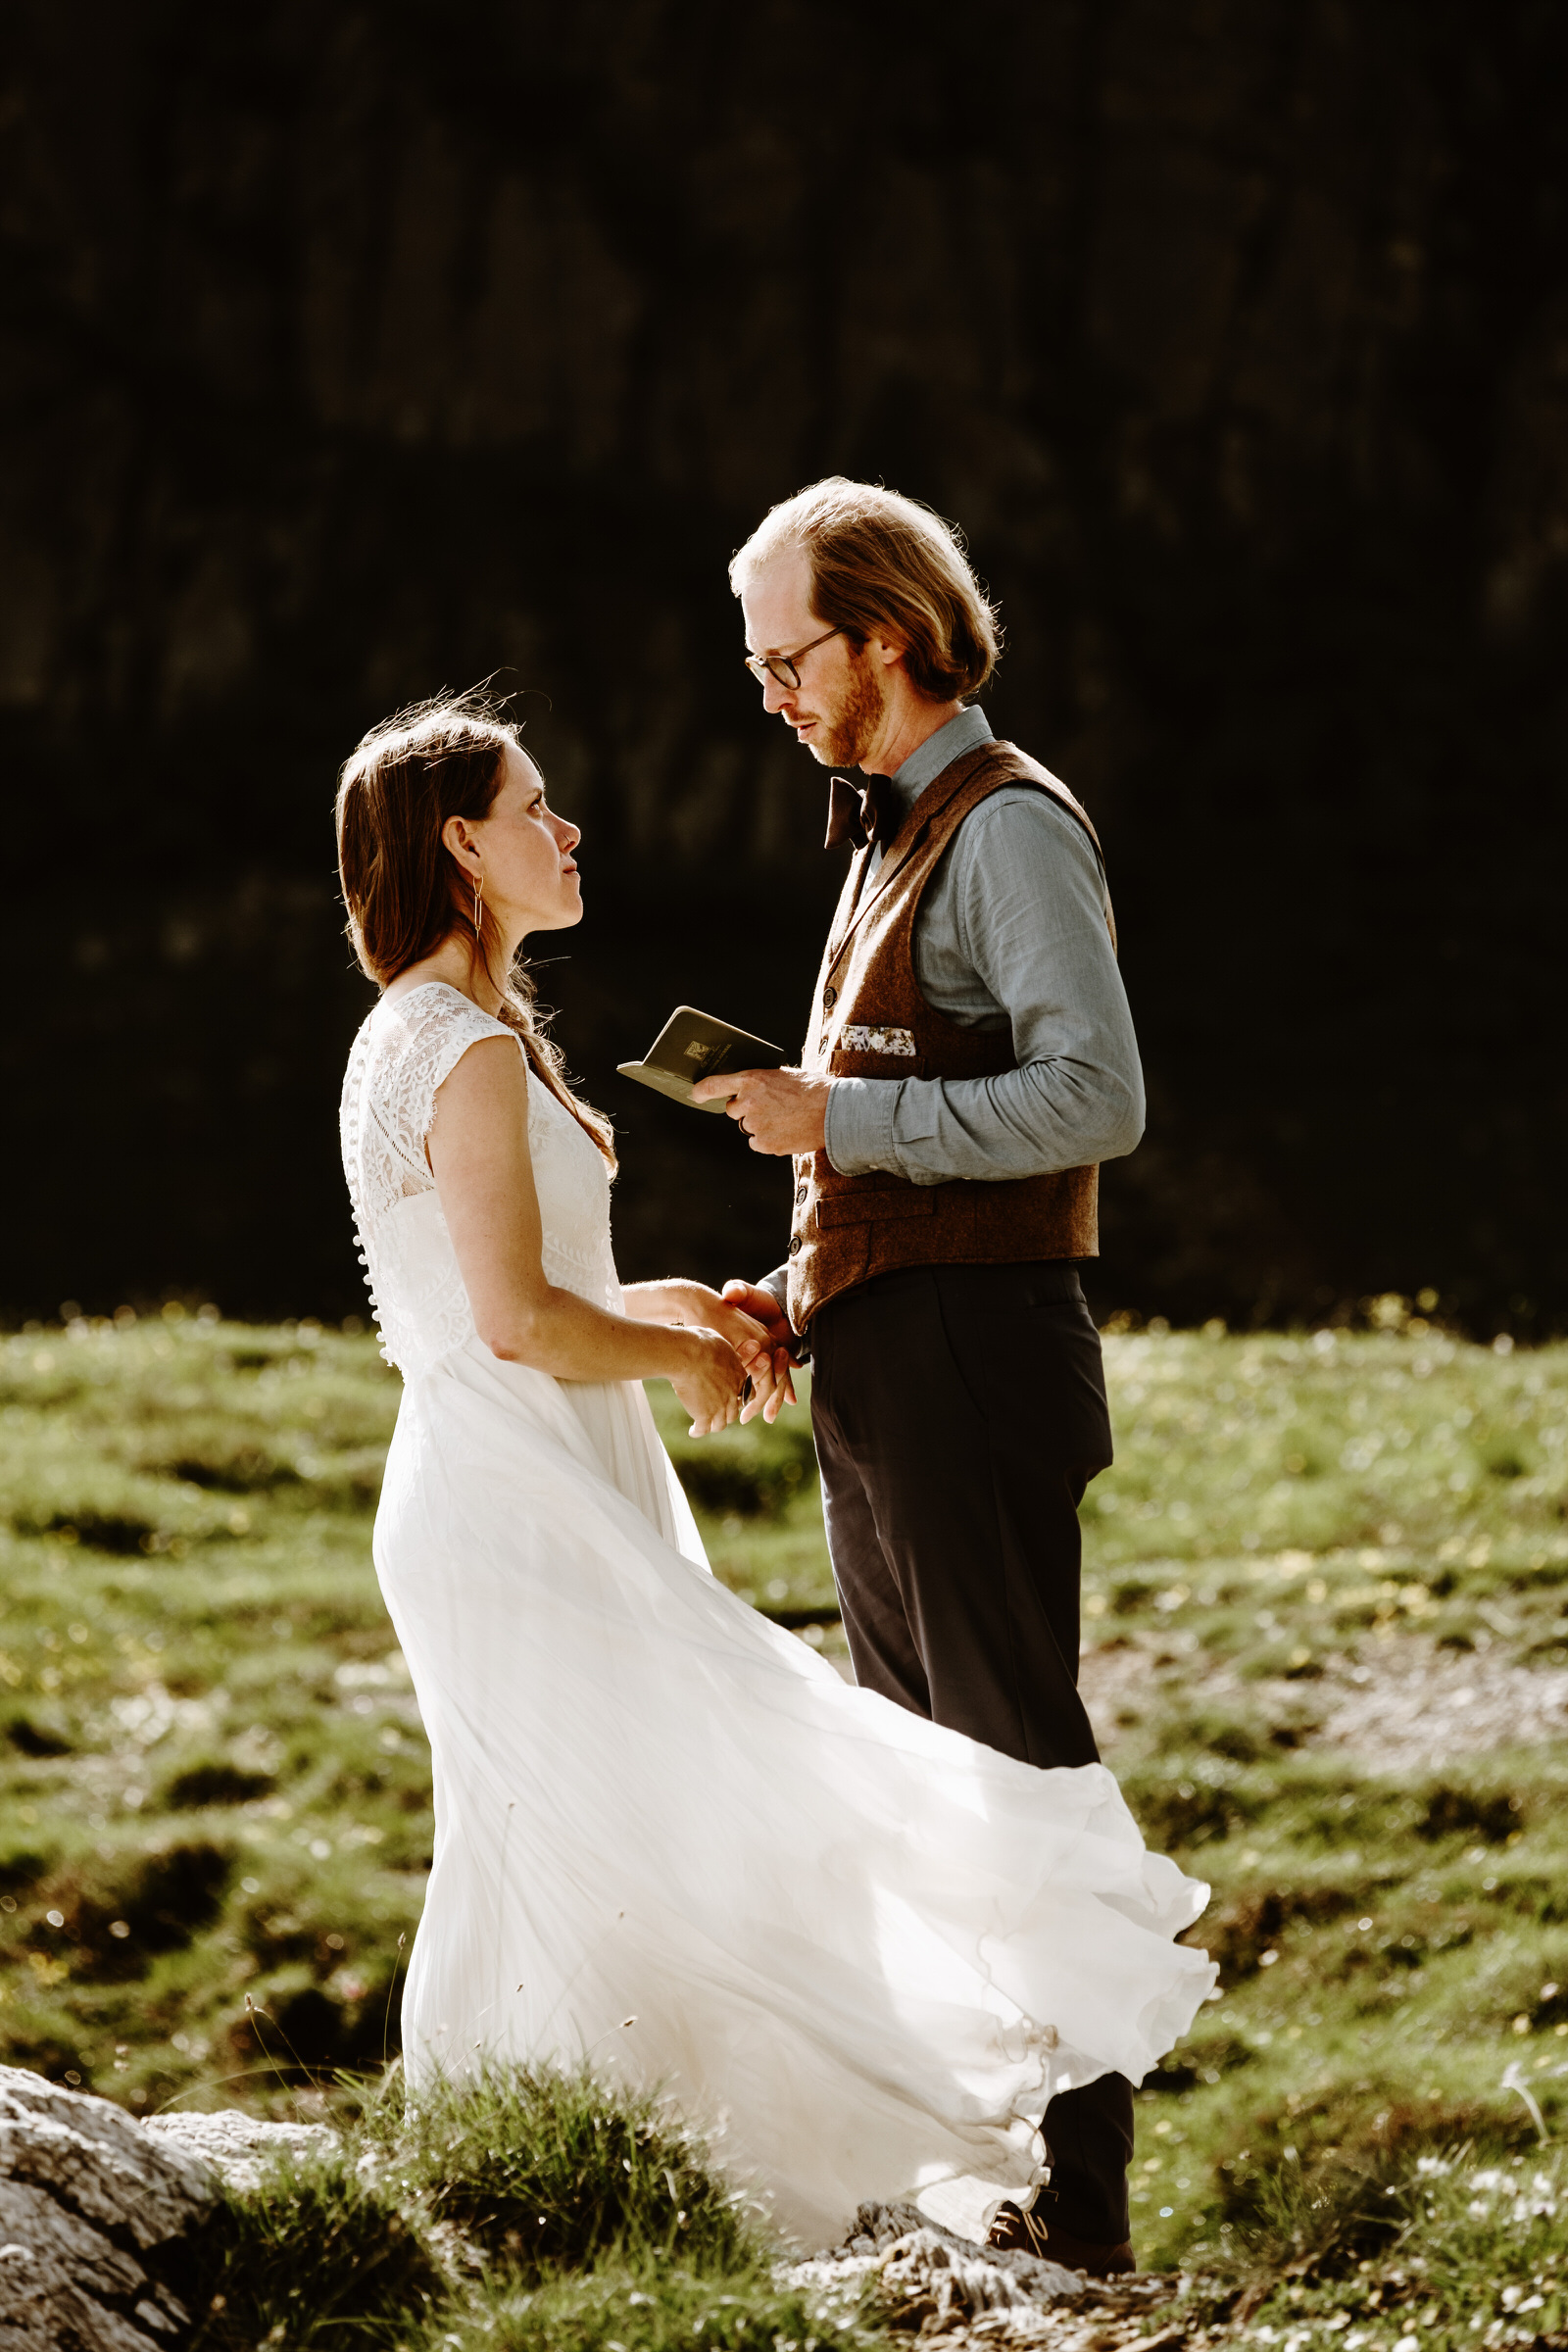 How To Personalize Your Elopement Ceremony - Wild Connections